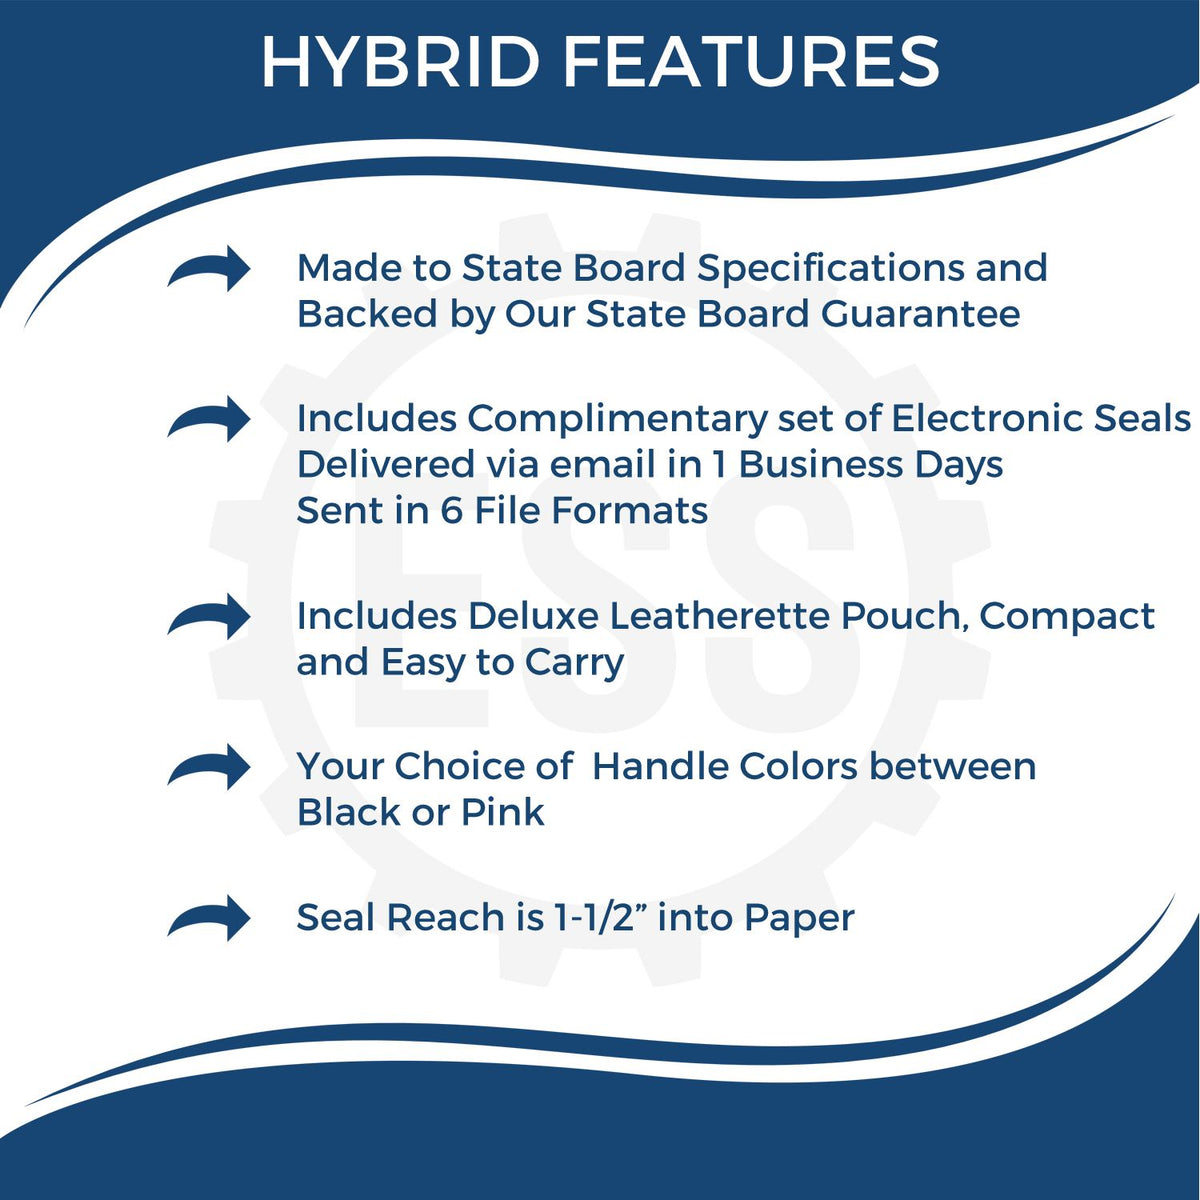 A picture of an infographic highlighting the selling points for the Hybrid Hawaii Architect Seal